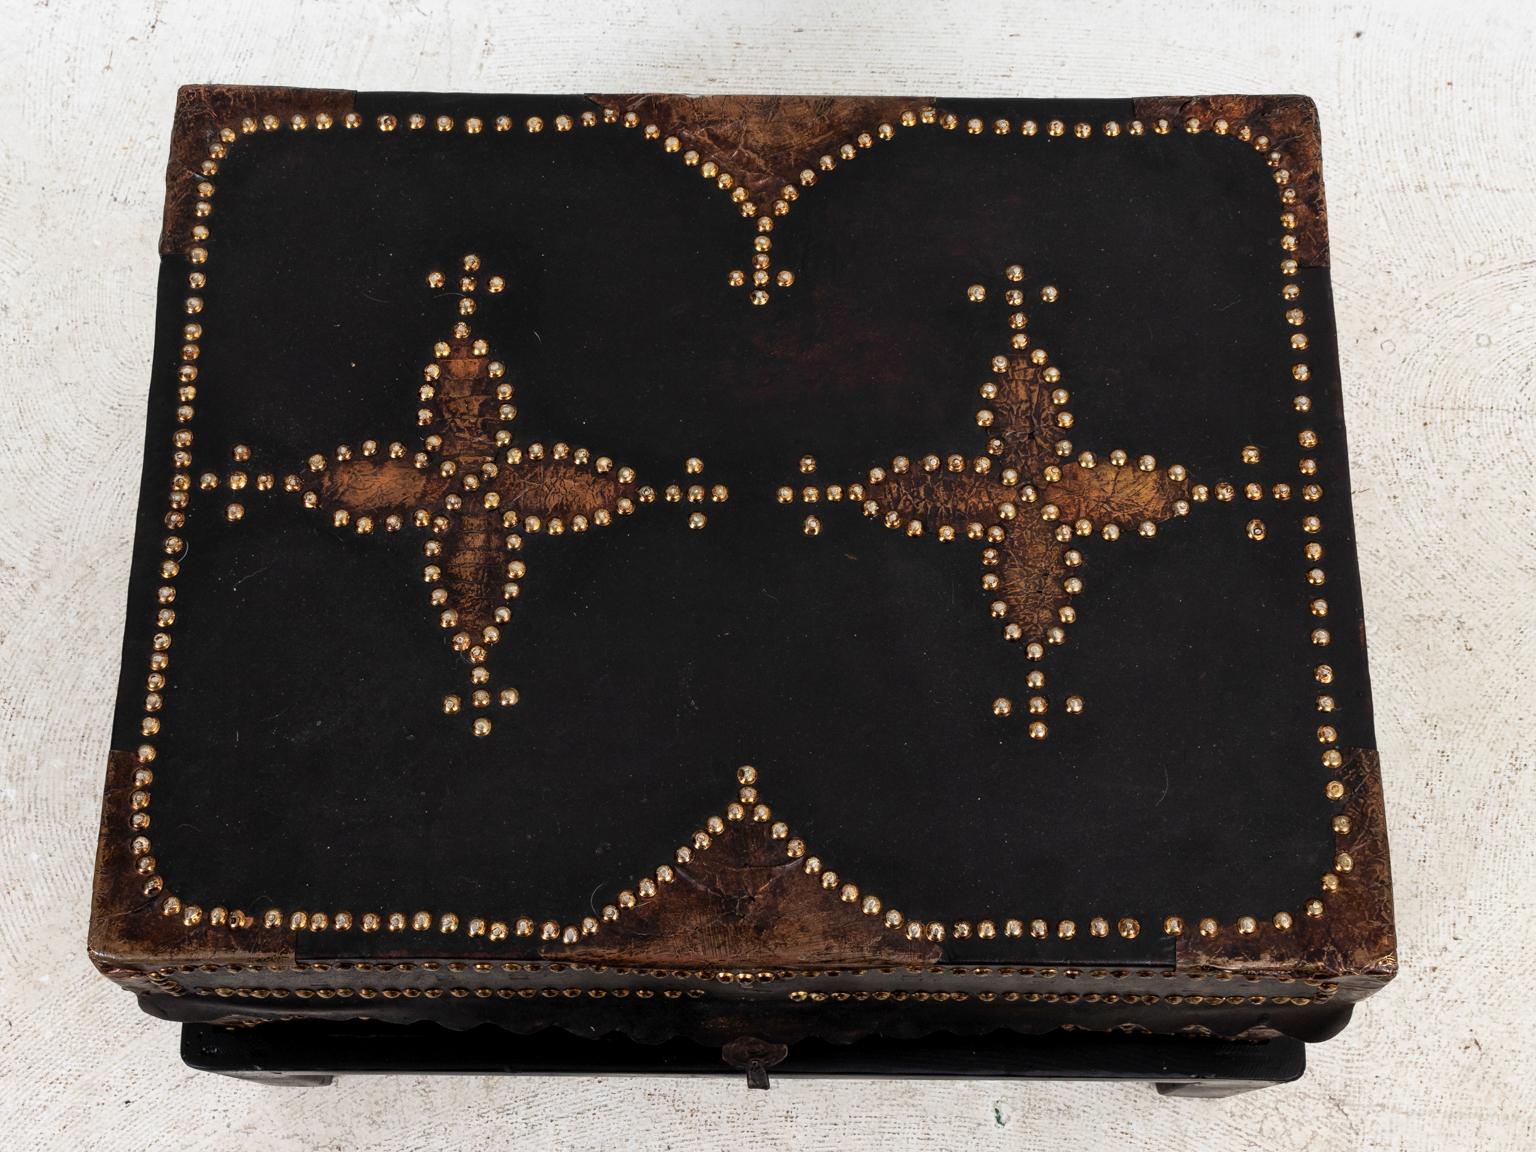 Black leather trunk on stand with brass tacks, circa 19th century. Made in Spain. Please note of wear consistent with age including distressed finish to the leather, patina to metal handles, and minor scratches on the bottom stand.